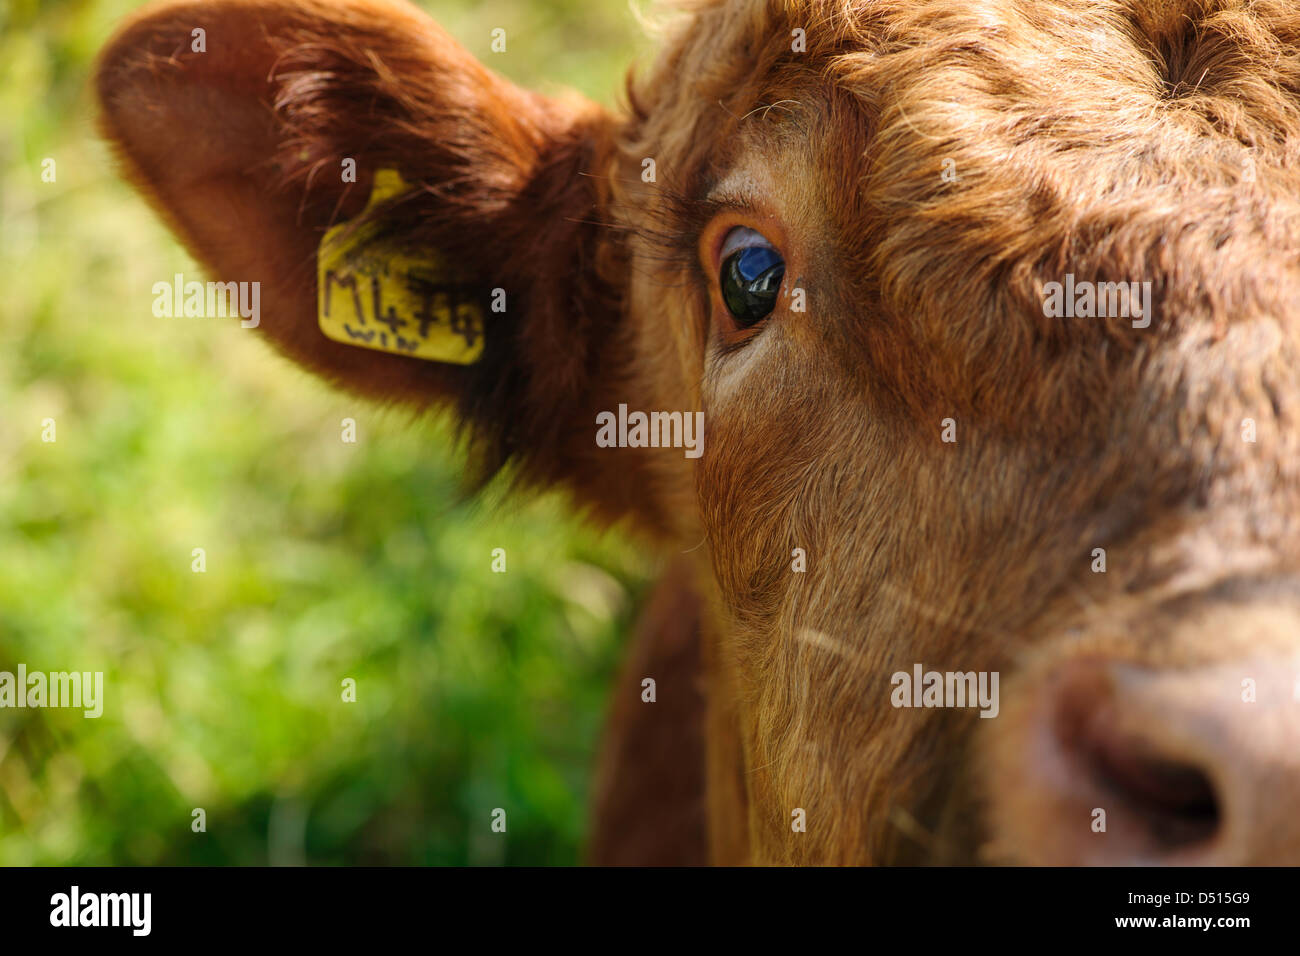 Close up of bulls head, nose to ears Stock Photo